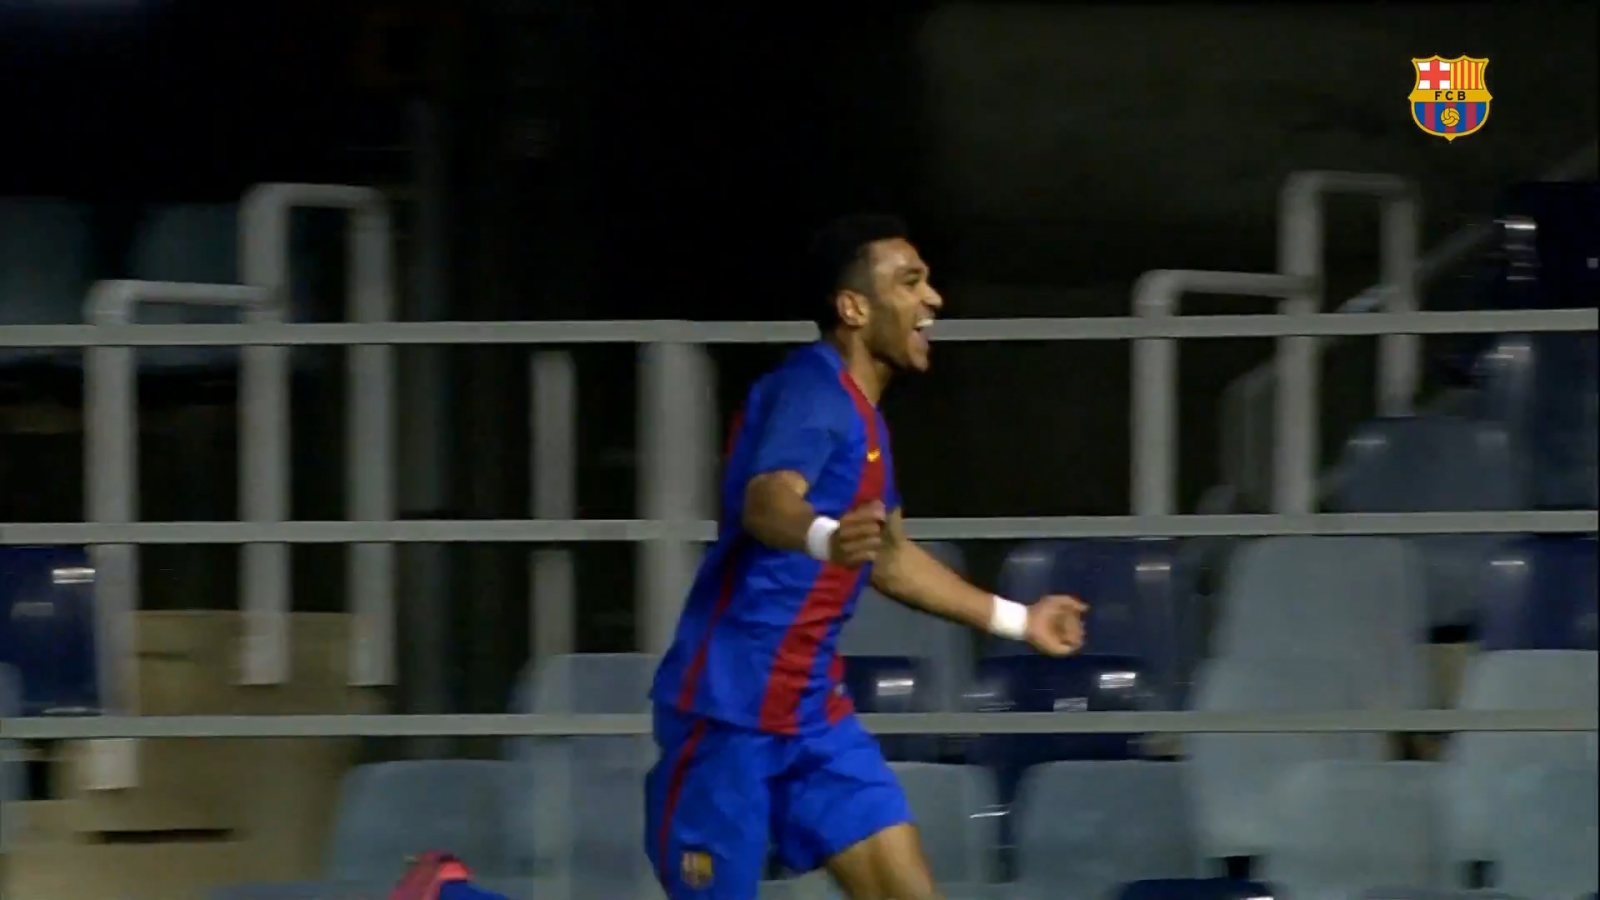 The new Messi? Barcelona youngster Jordi Mboula scores wonder goal